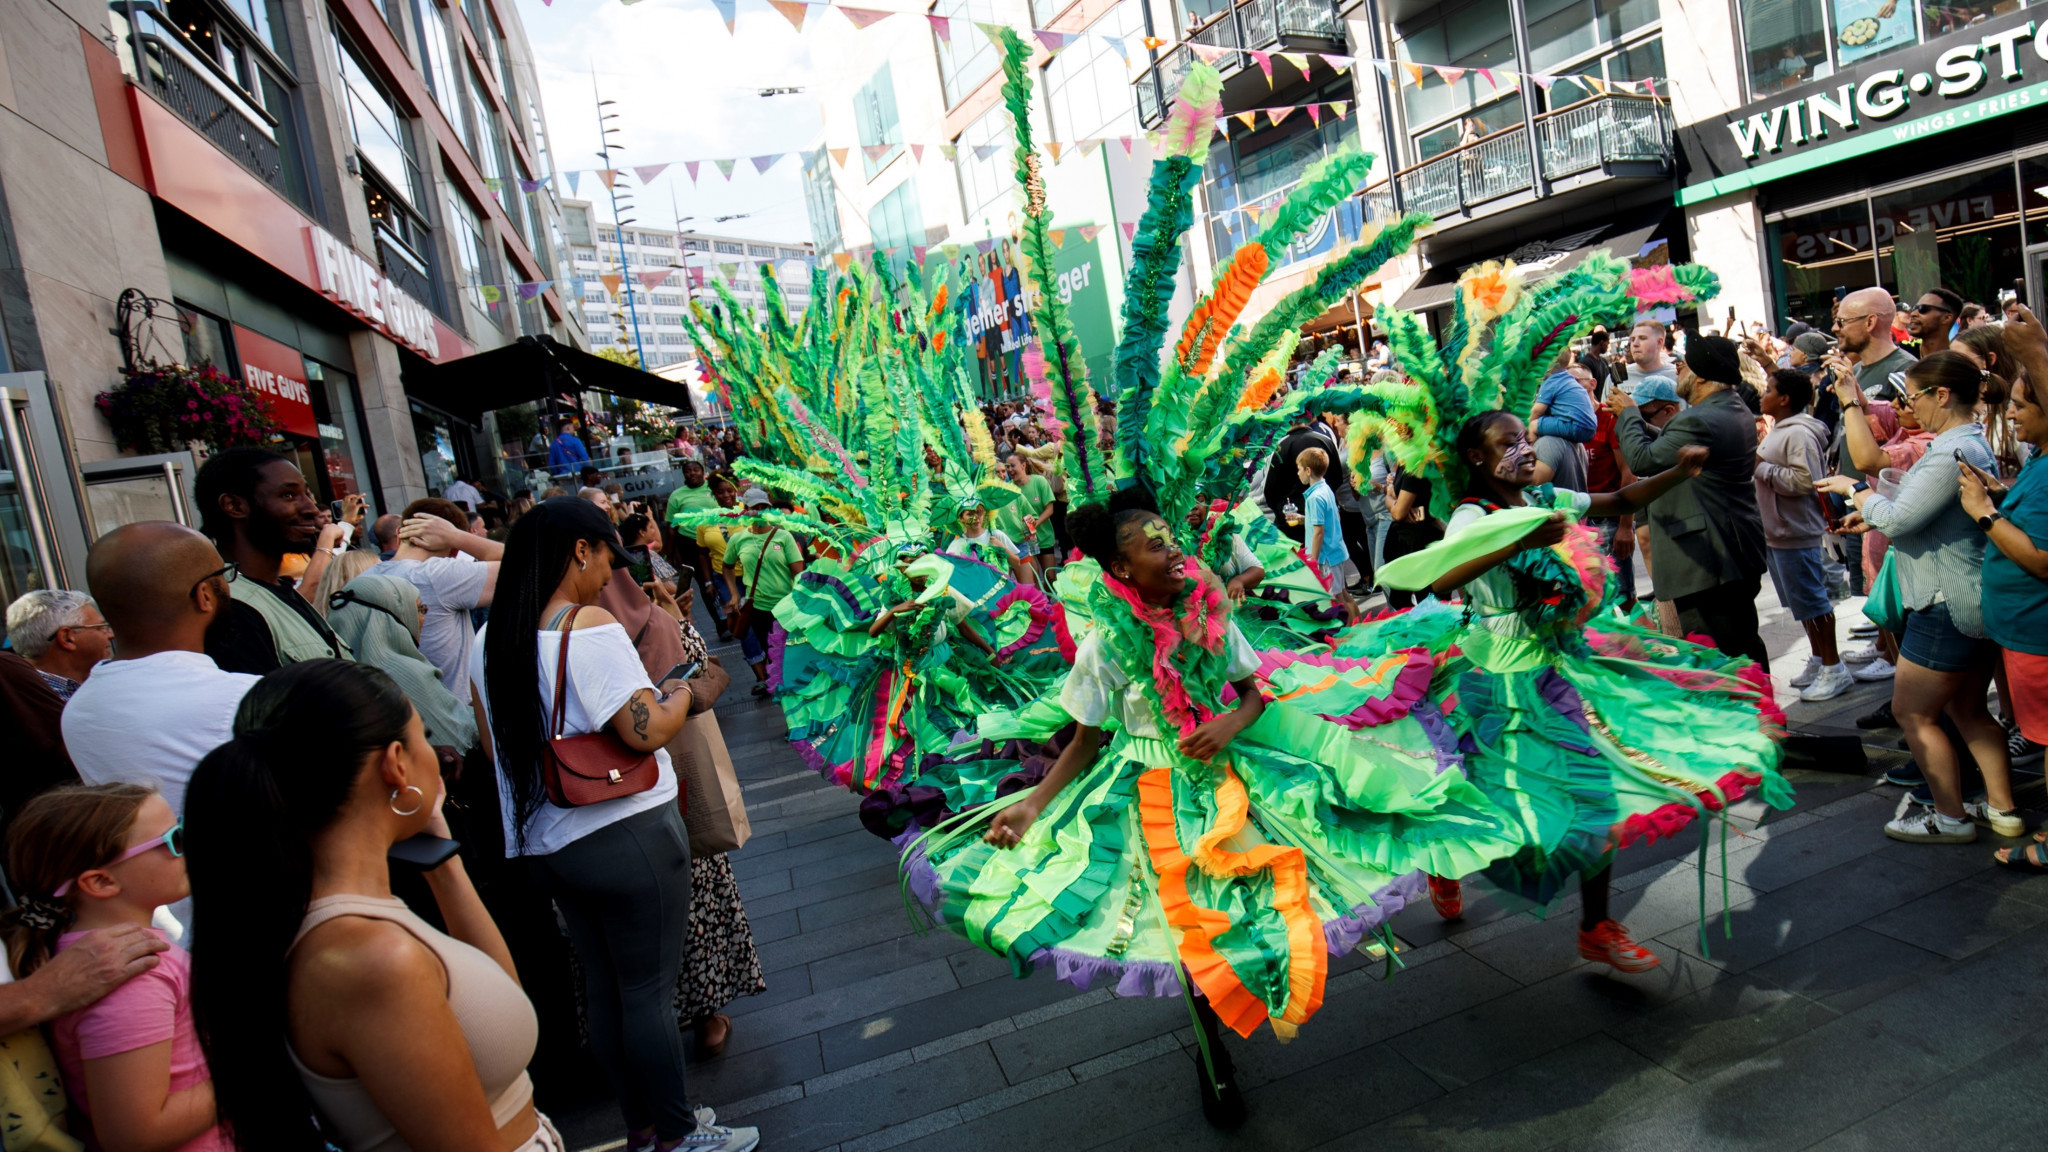 Carnival outfits were created by participants as part of the Birmingham 2022 Festival ©Birmingham 2022